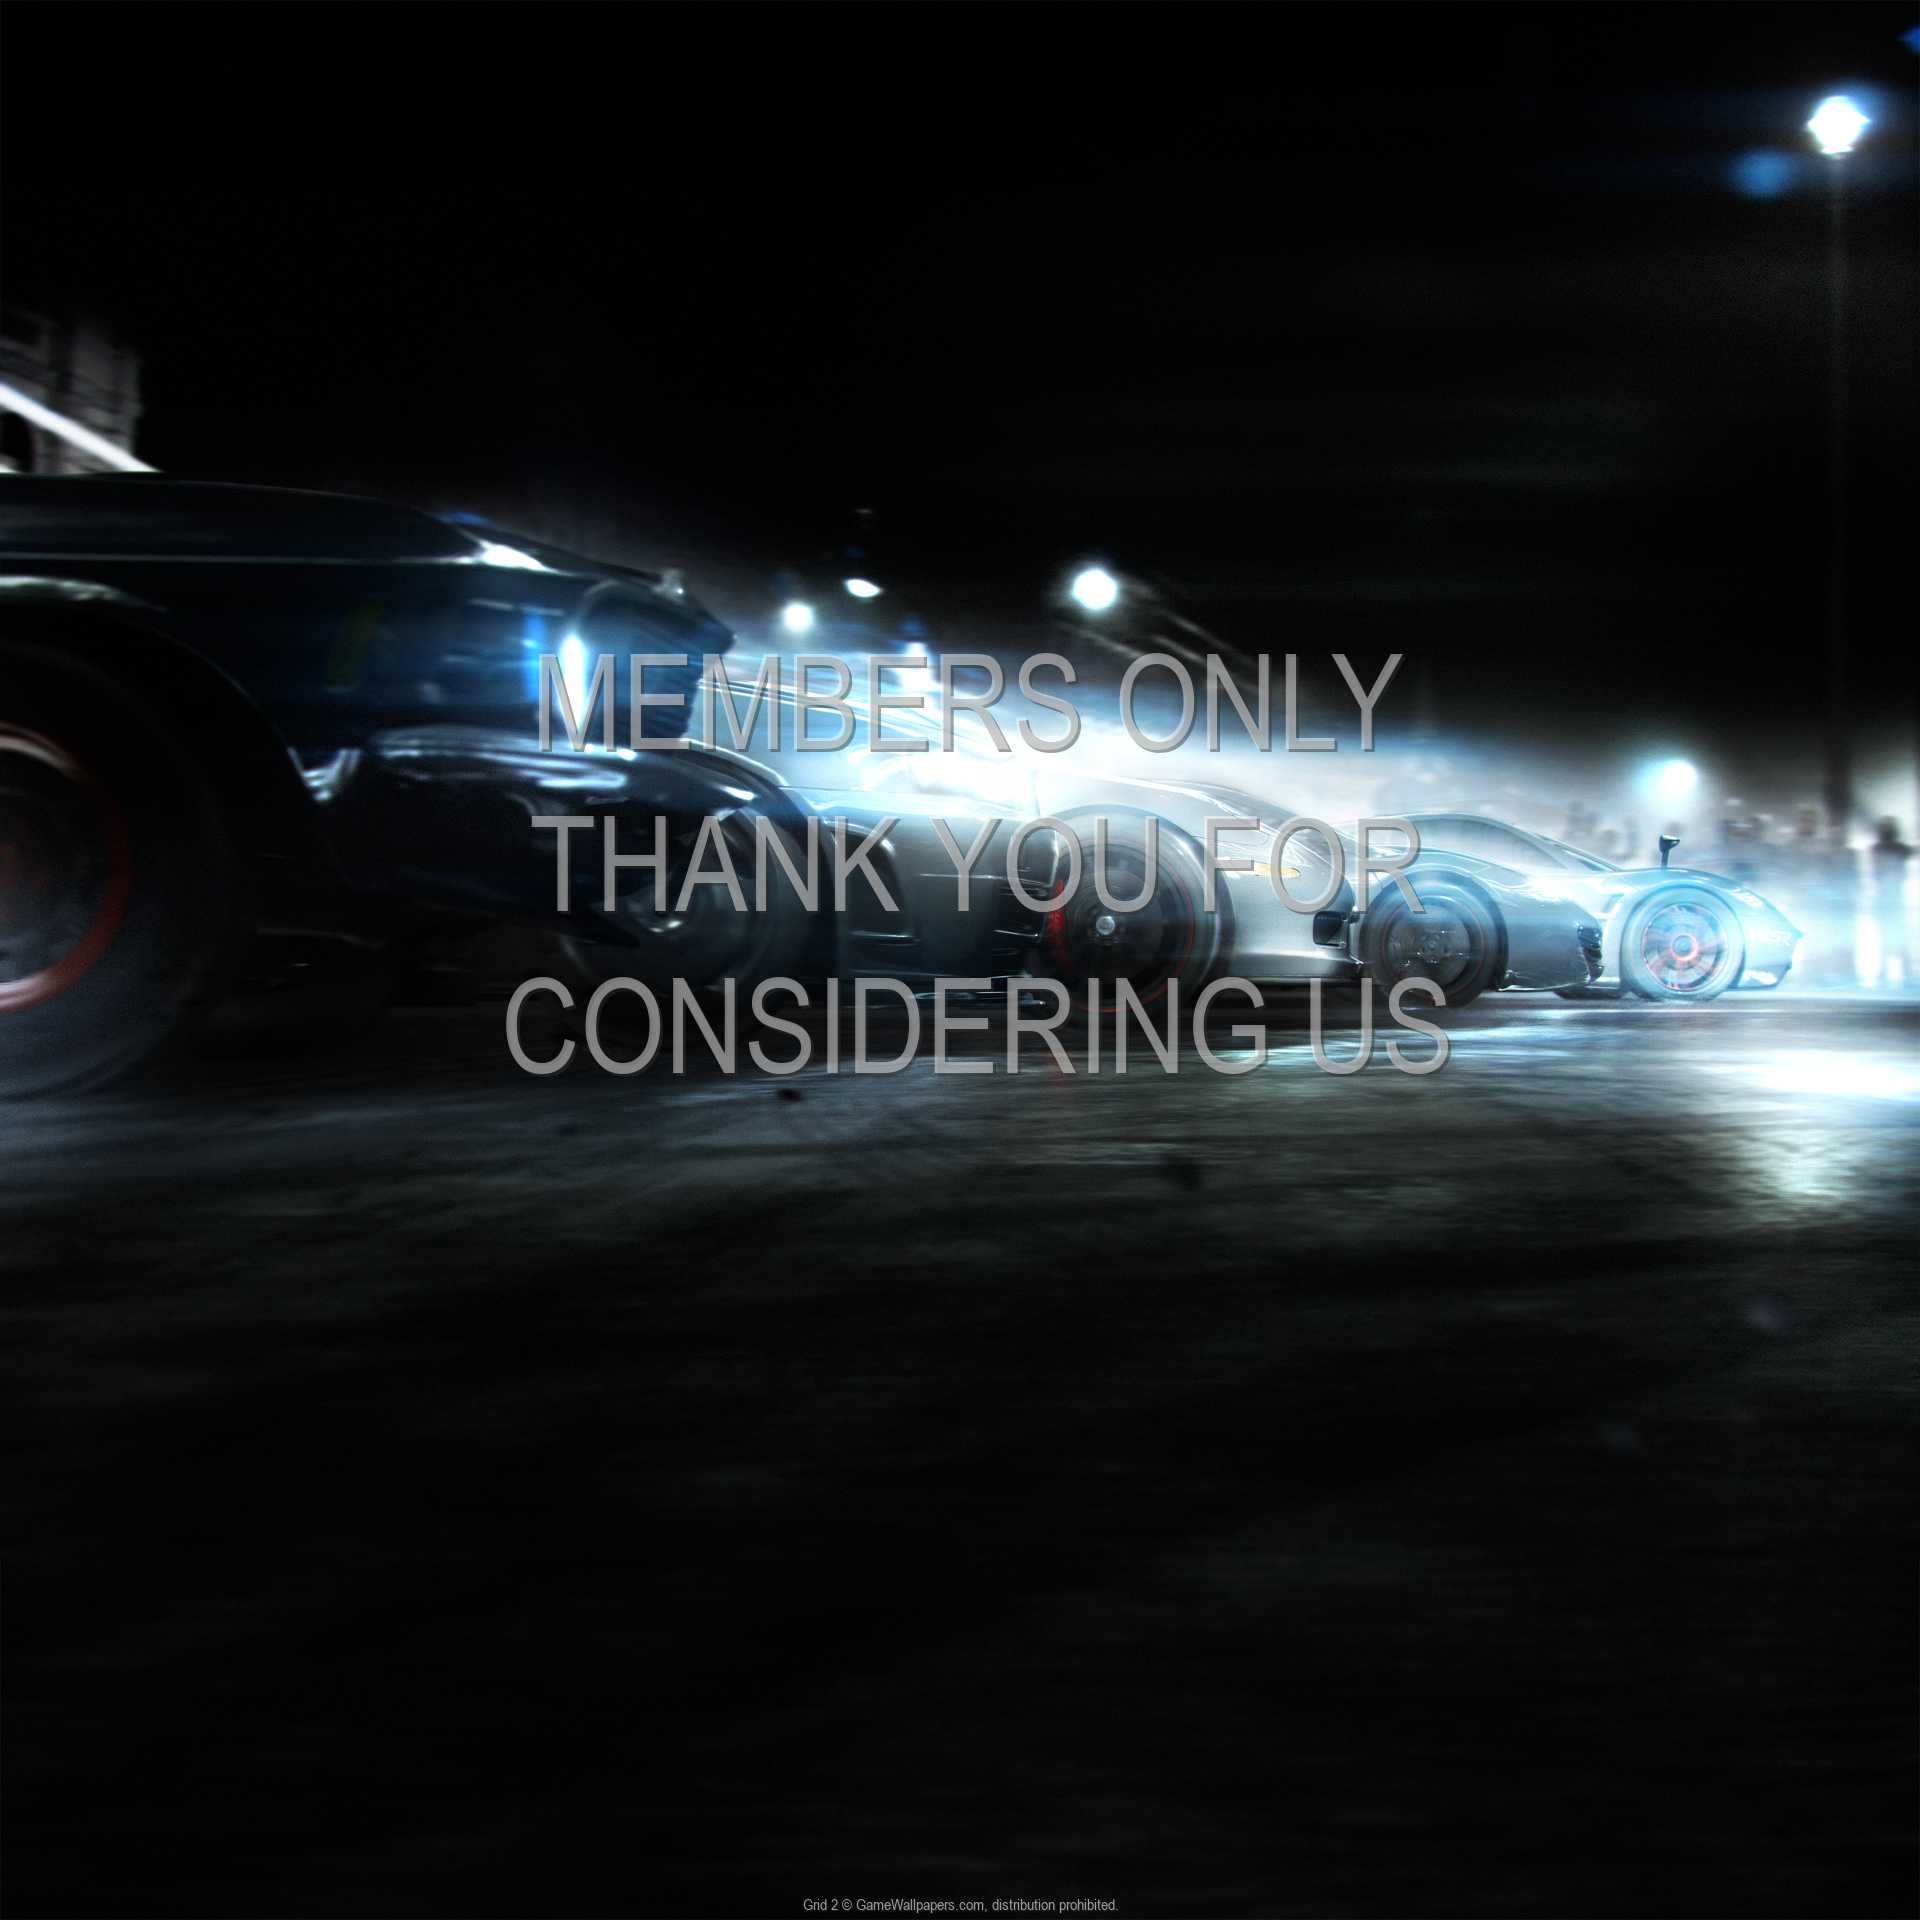 Grid 2 1080p%20Horizontal Mobile wallpaper or background 01